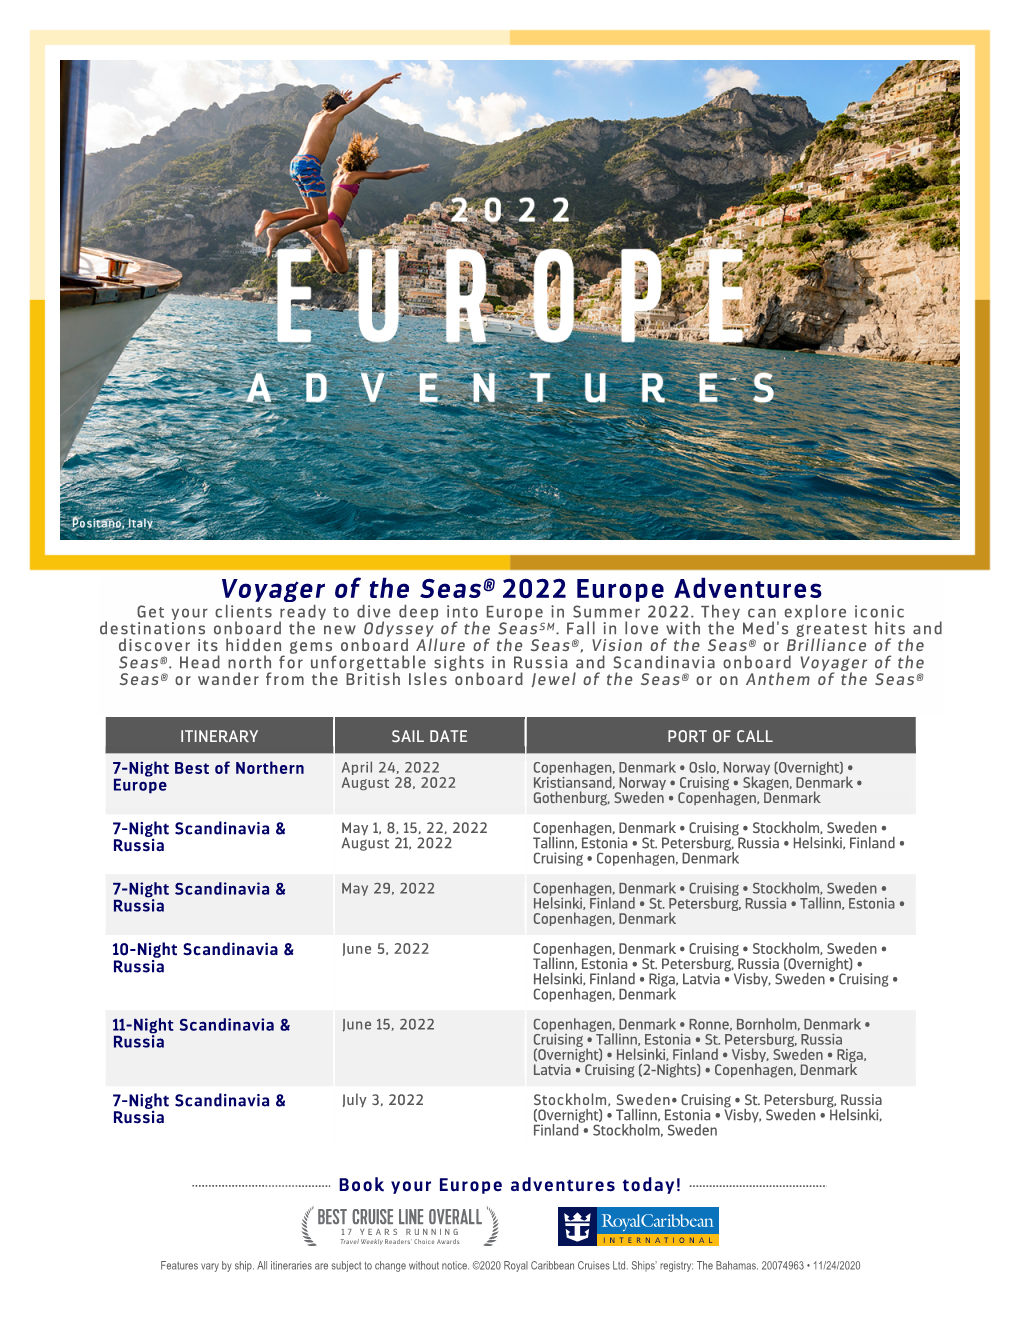 Voyager of the Seas® 2022 Europe Adventures Get Your Clients Ready to Dive Deep Into Europe in Summer 2022